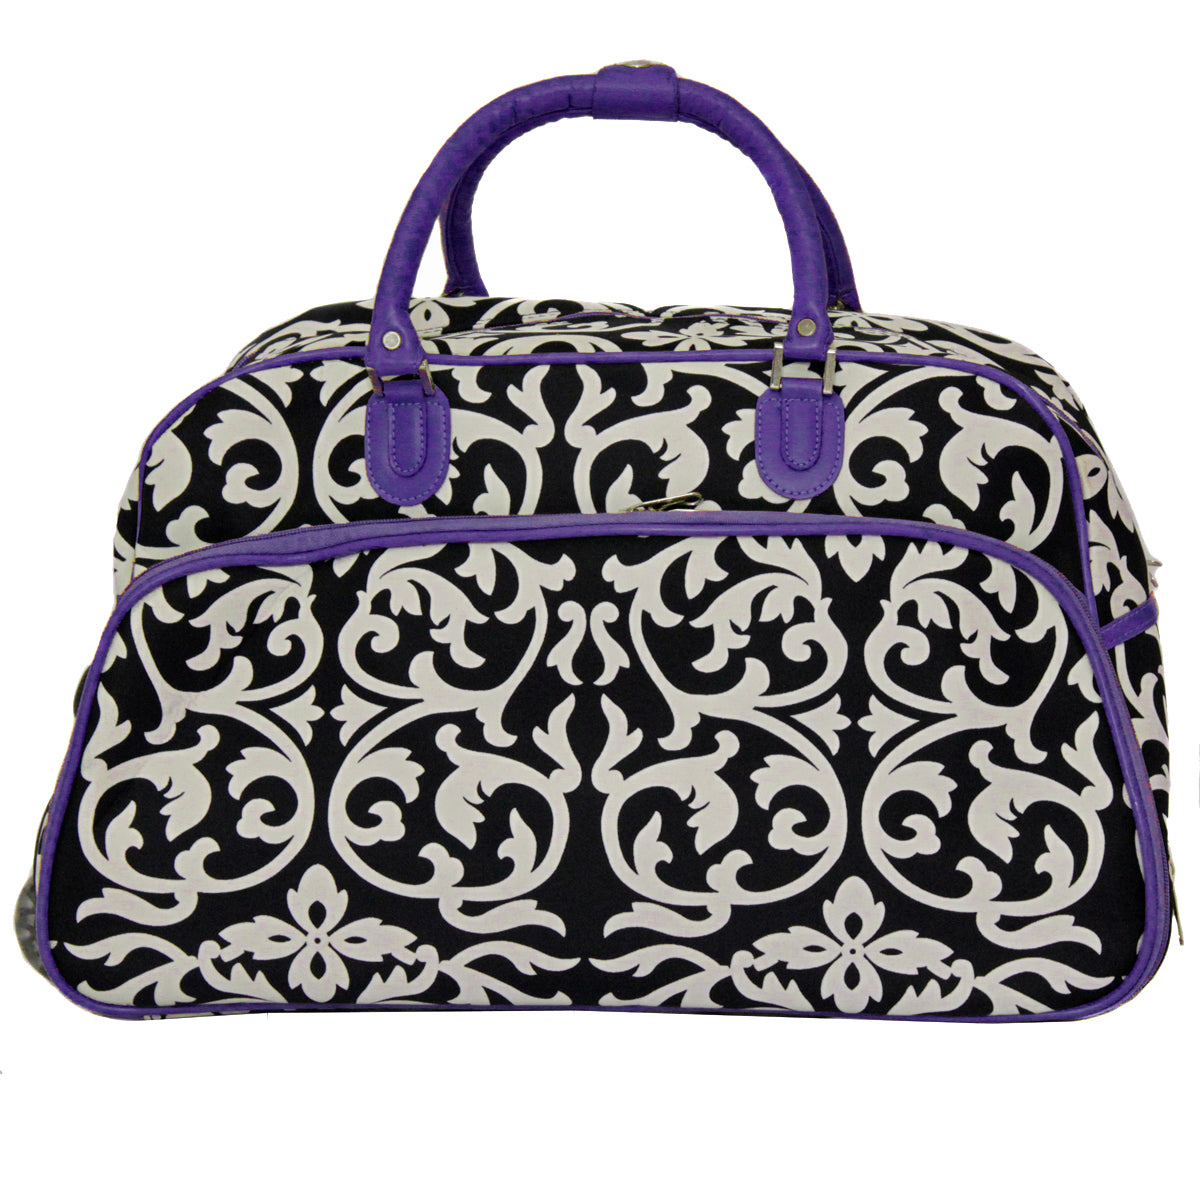 CalBags Damask 21" Rolling Carry-On Duffel Bags